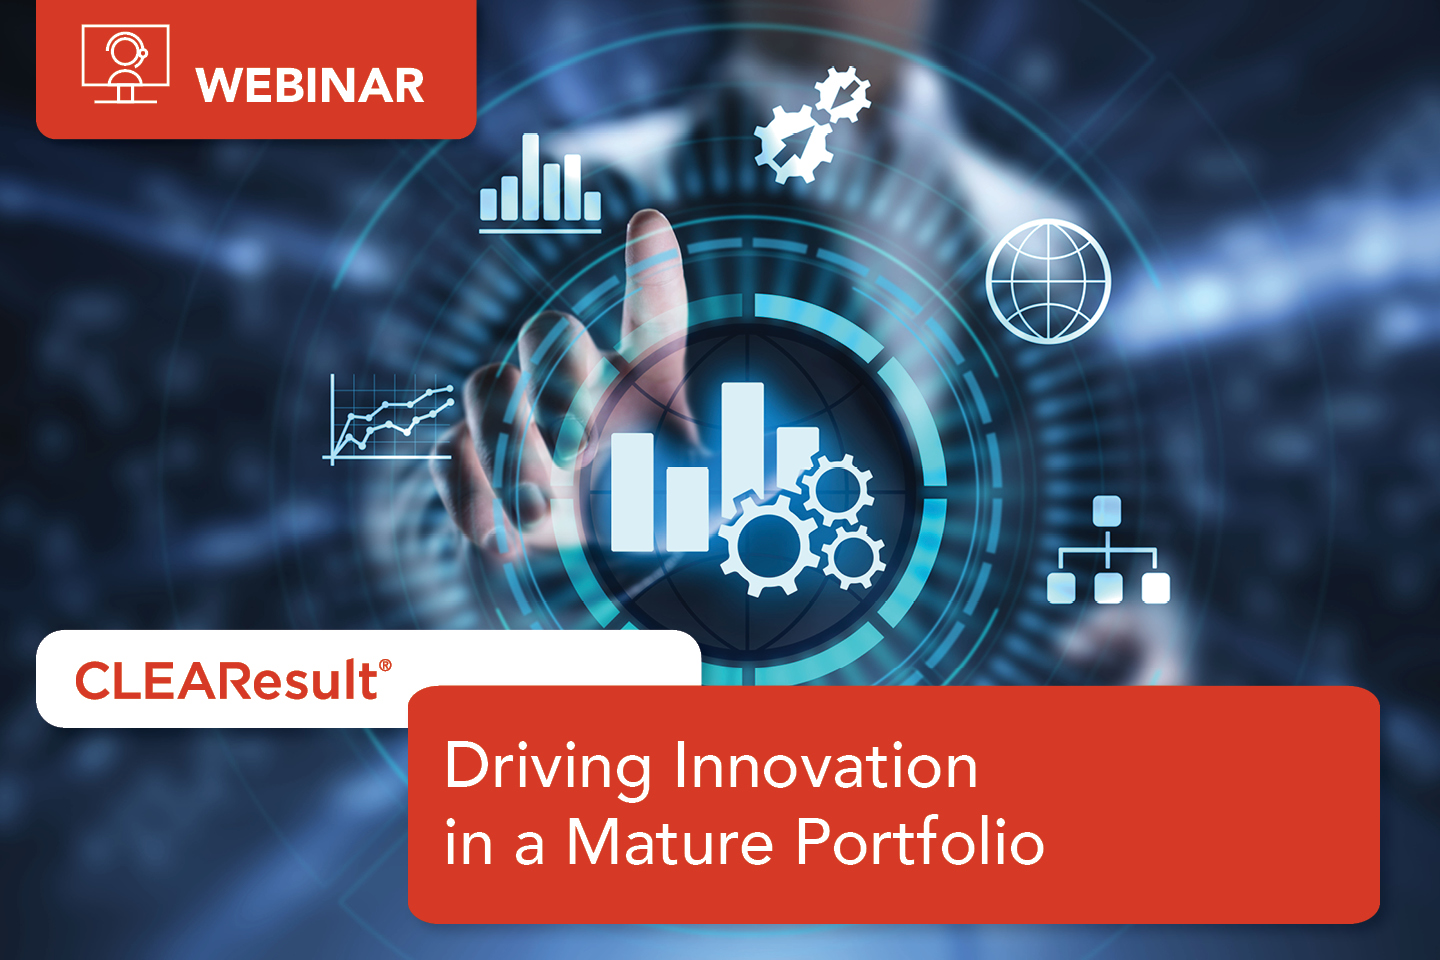 Watch our full webinar, Driving Innovation in a Mature Portfolio